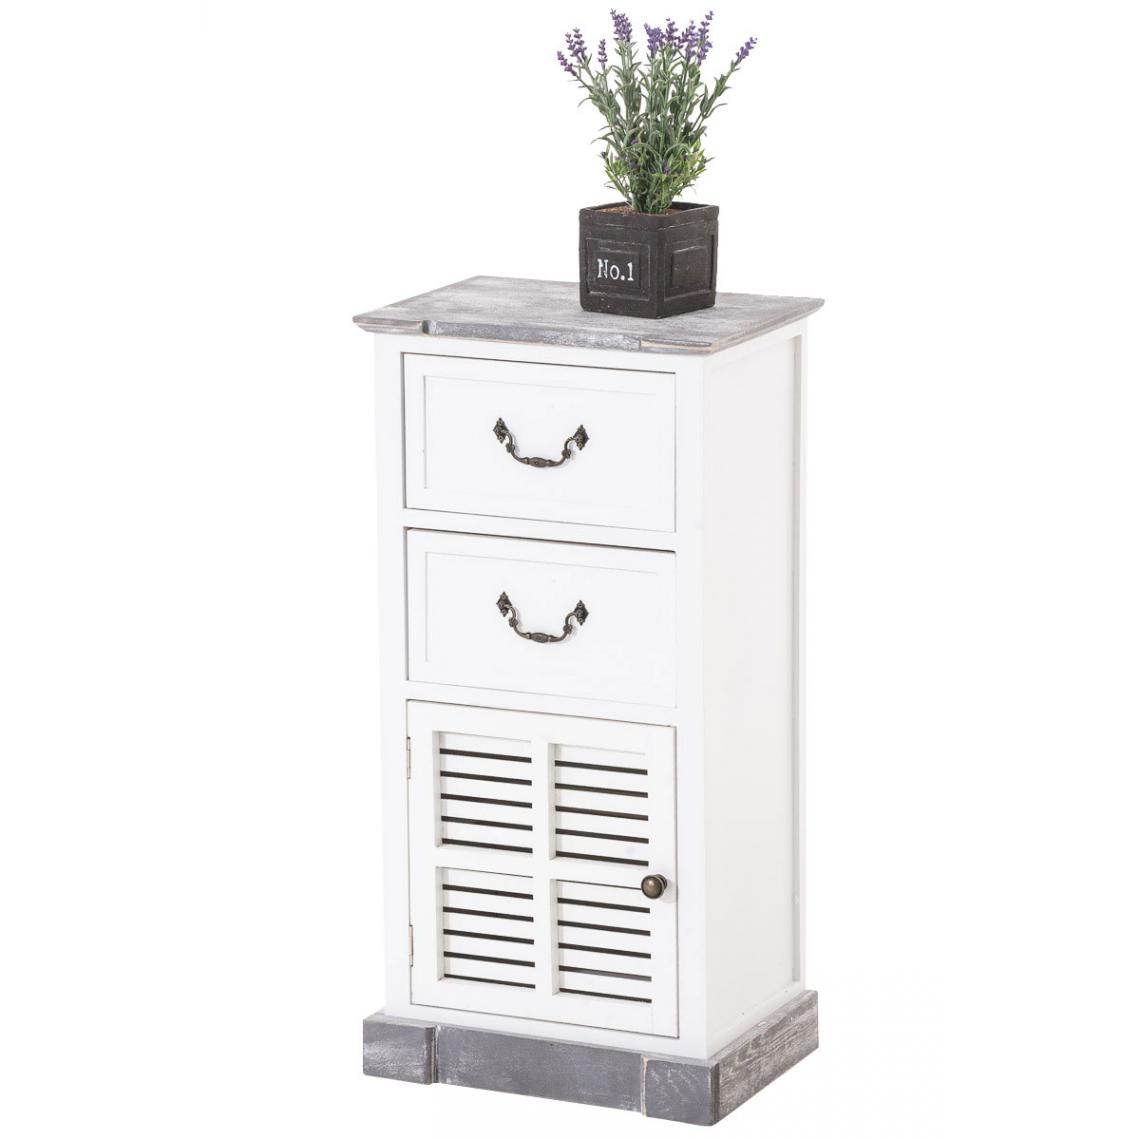 Icaverne - Chic Commode categorie Georgetown couleur blanc - Chaises